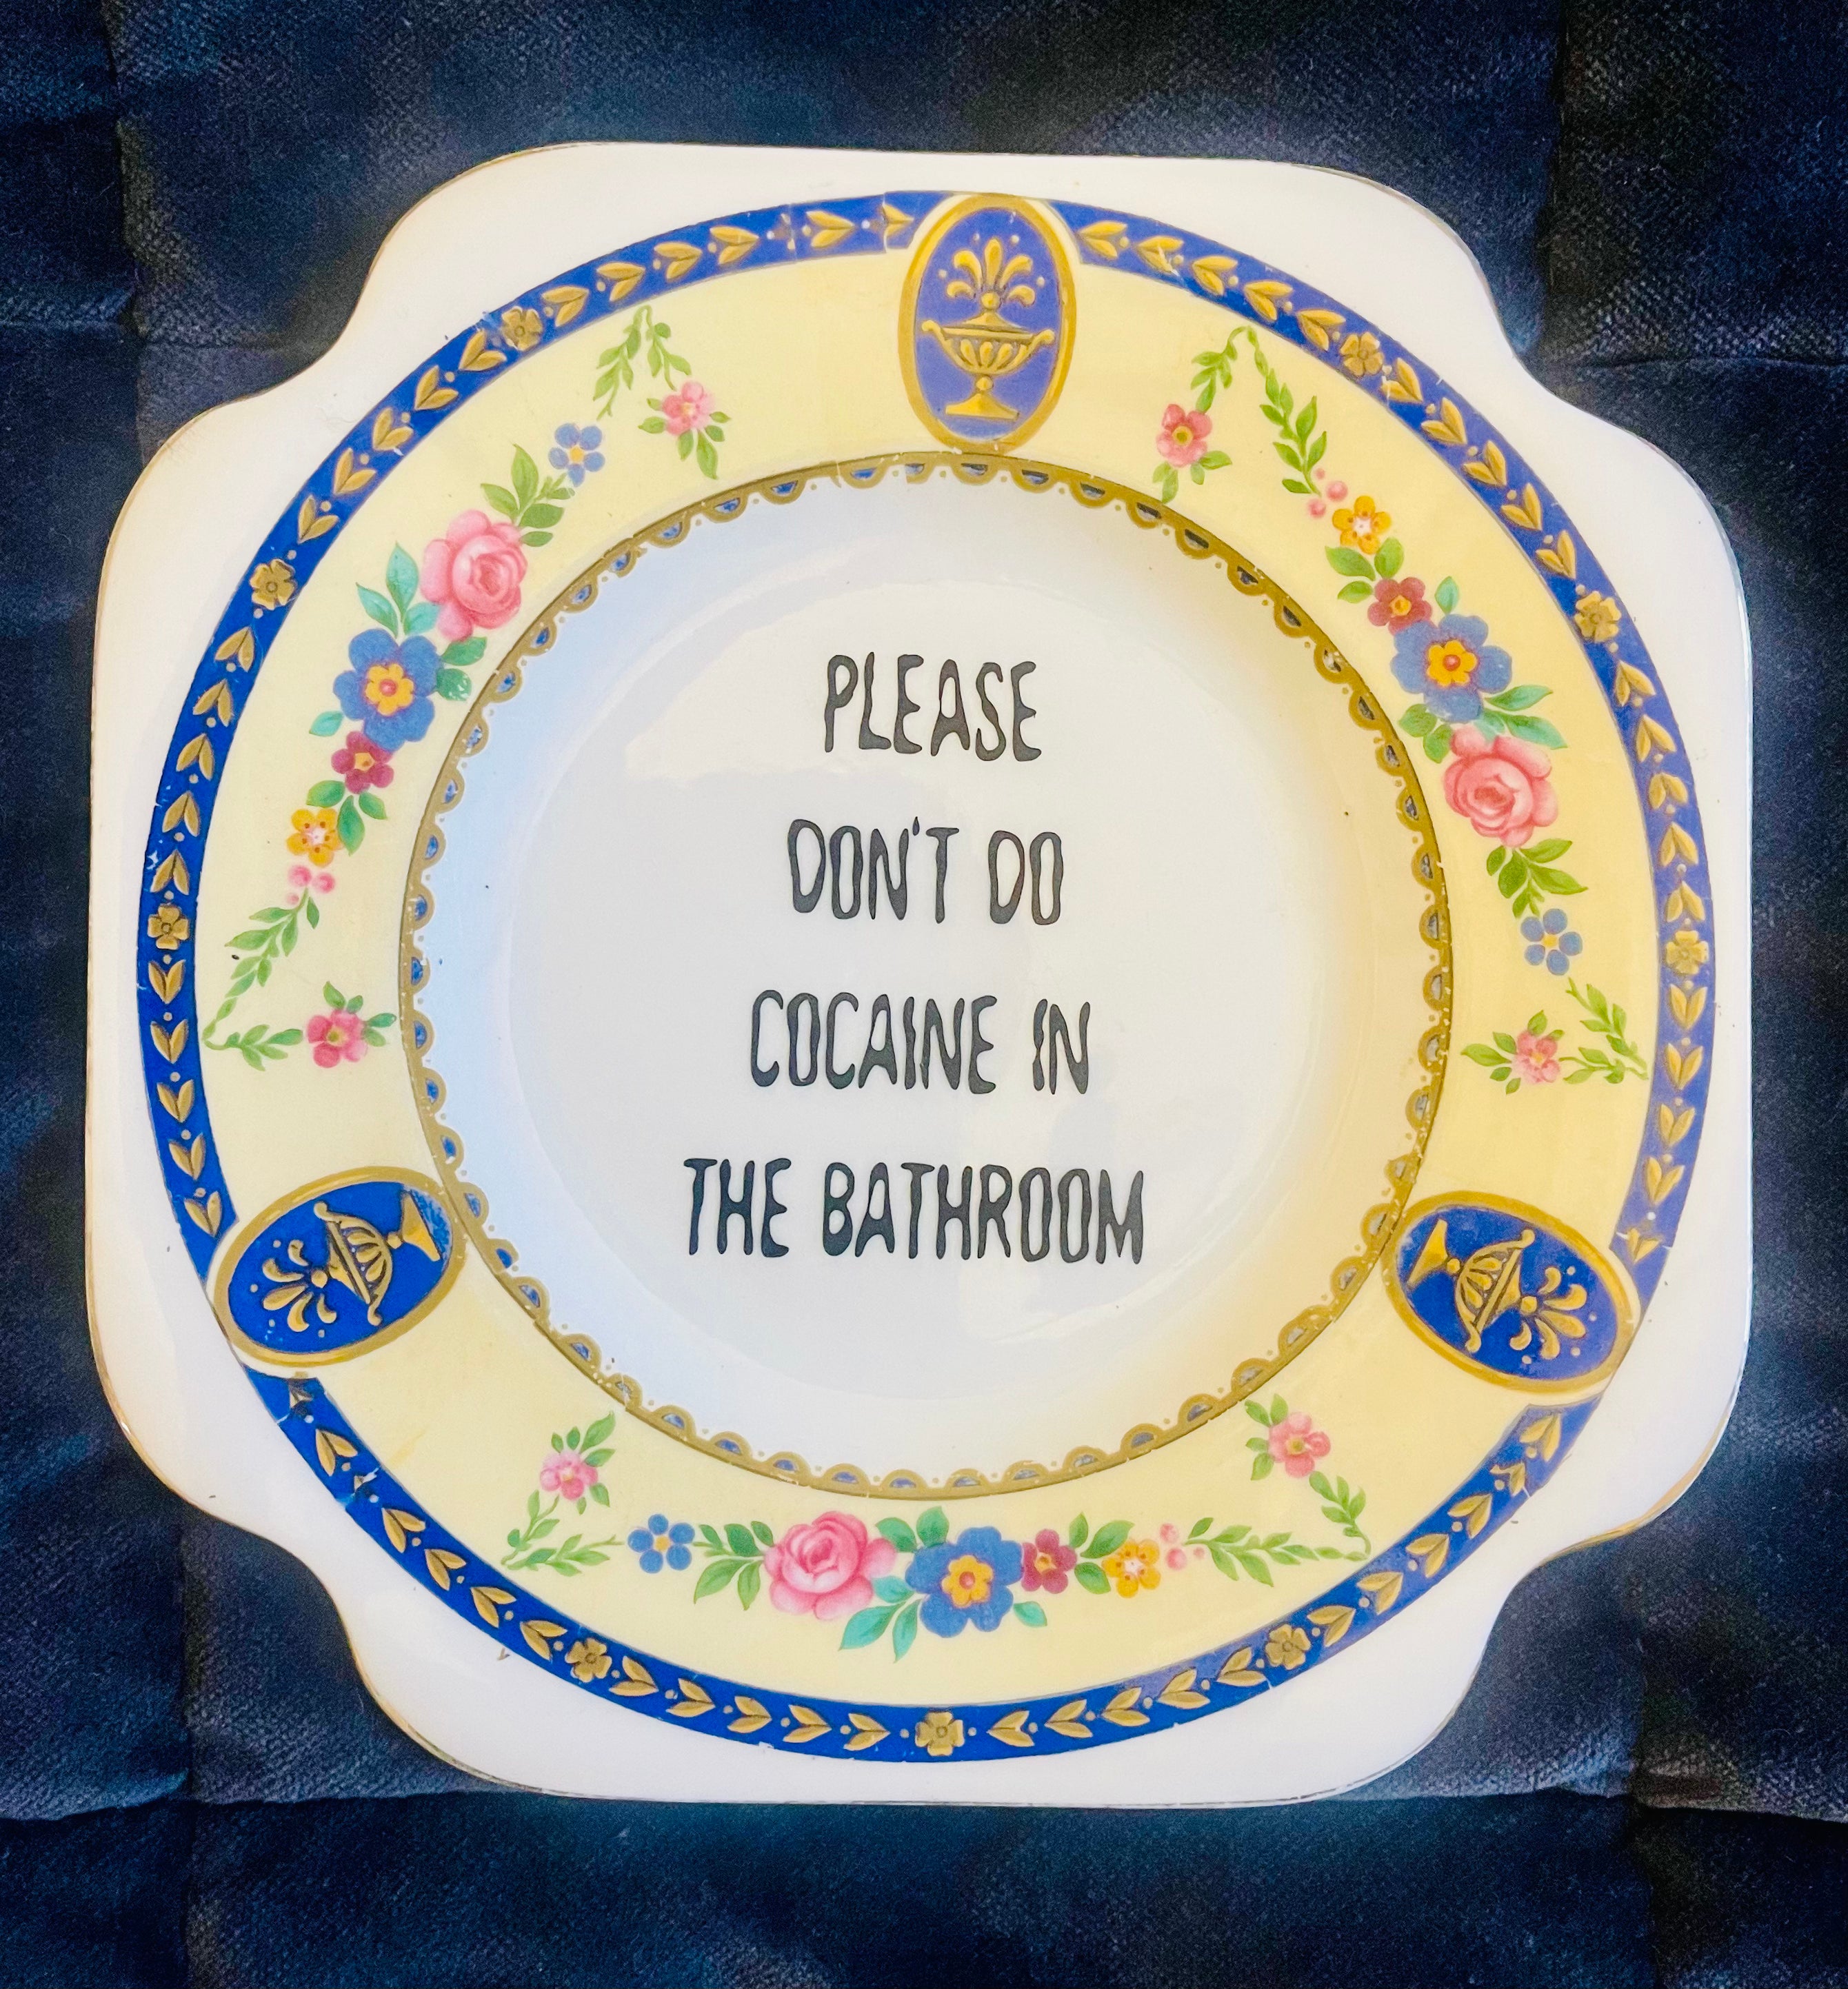 Sweary Plate - Please don’t do cocaine in the bathroom